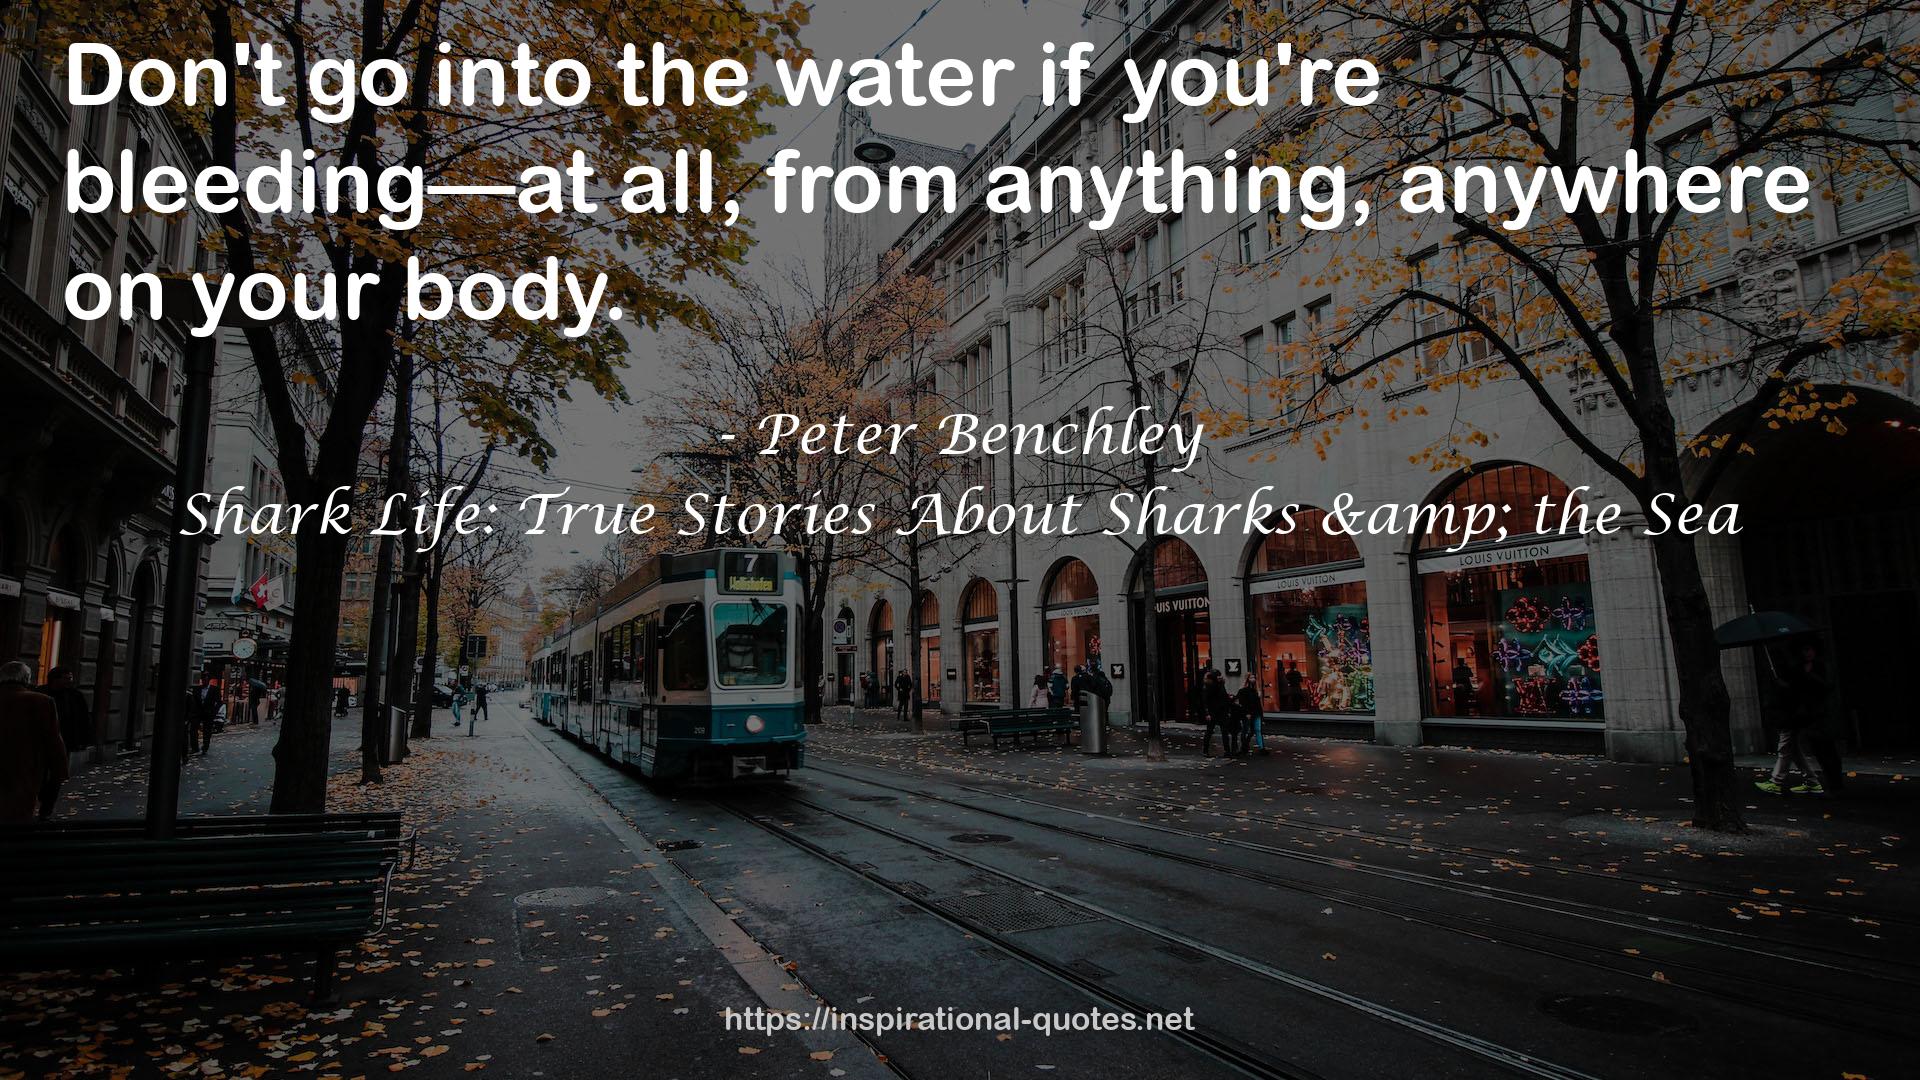 Shark Life: True Stories About Sharks & the Sea QUOTES